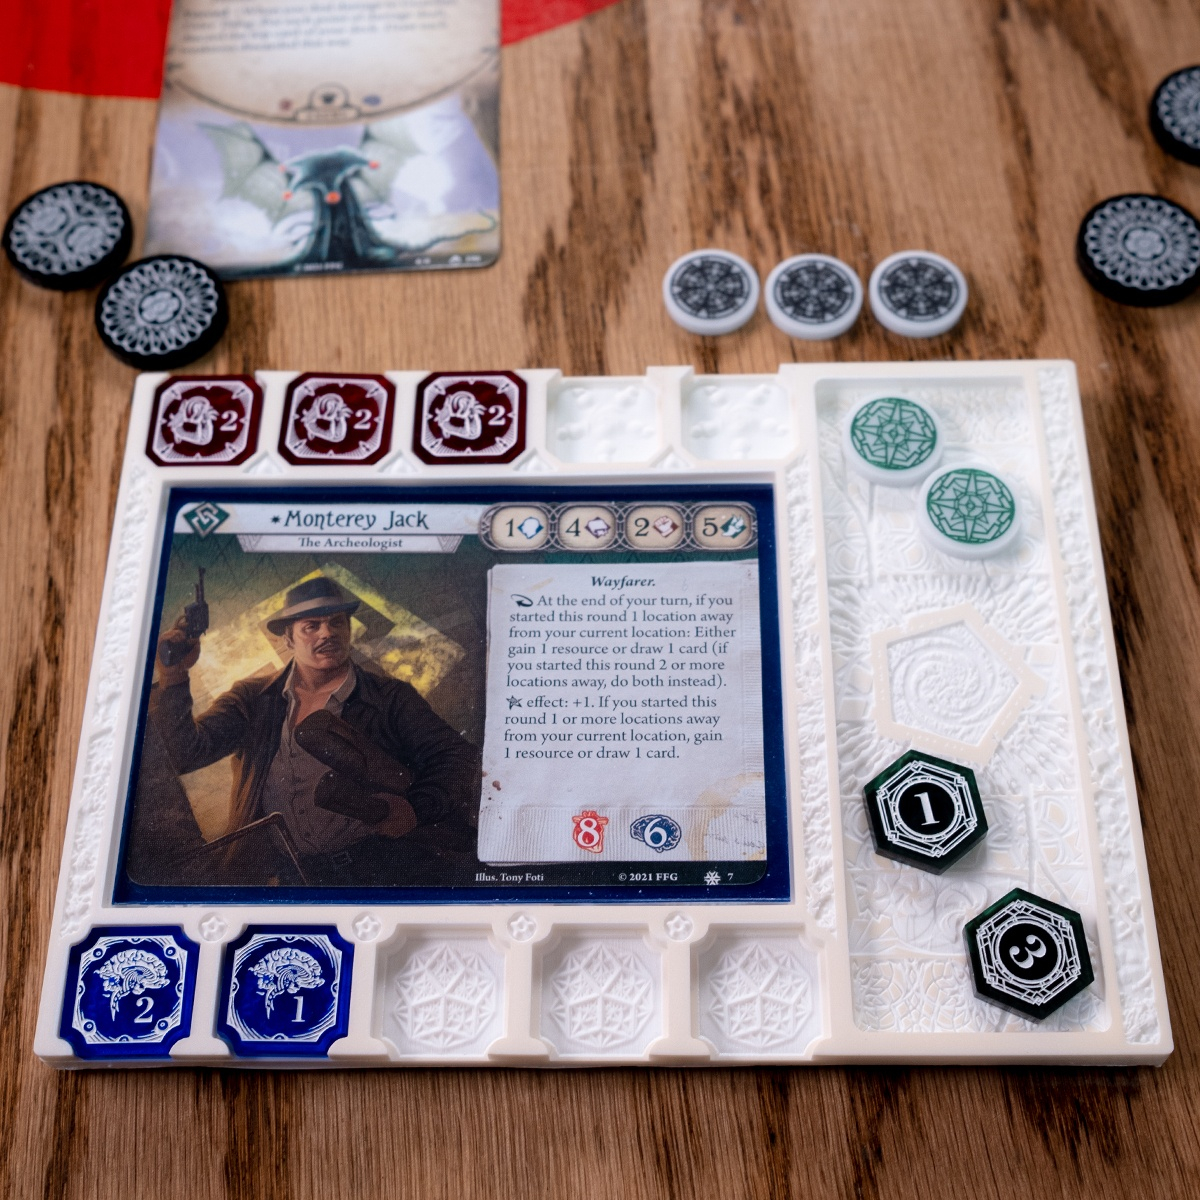 A straight on shot of the Edge of the Earth Mythos Board set up as it would be during a game of Arkham Horror LCG.  The investigator Monterey Jack is in the card holder spot with three two-value Damage Tokens above and two Sanity Tokens below, one two-value, and one one-value.  The board is surrounded by Arkham Horror LCG cards and Edge of the Earth Clue and Doom tokens